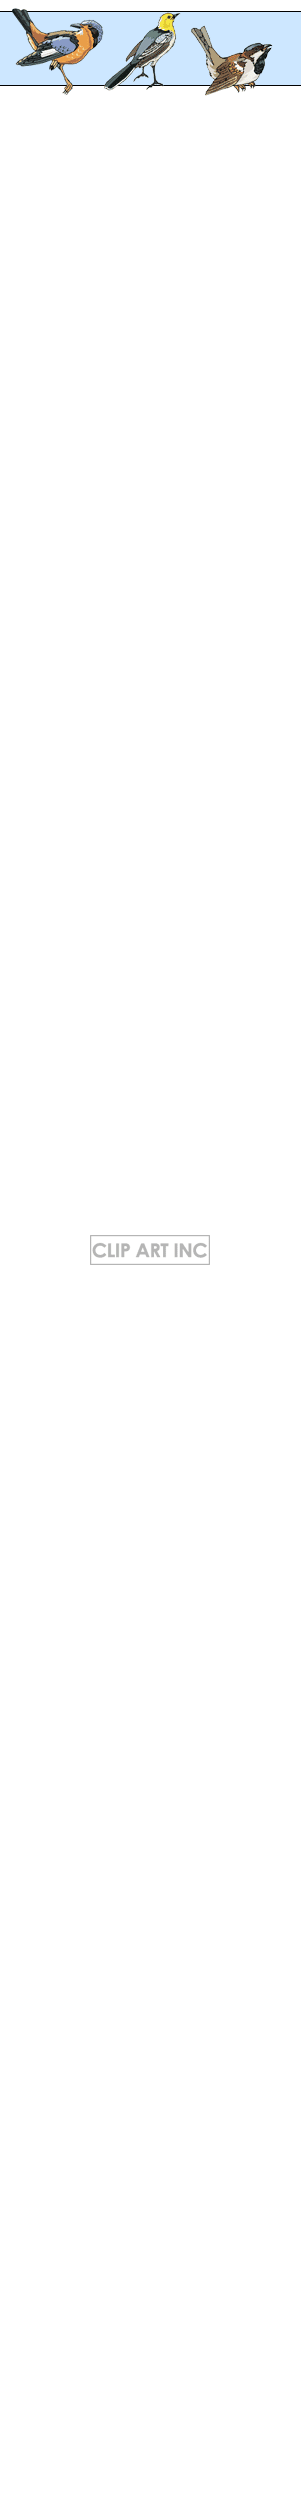 012 clipart. Commercial use image # 127978